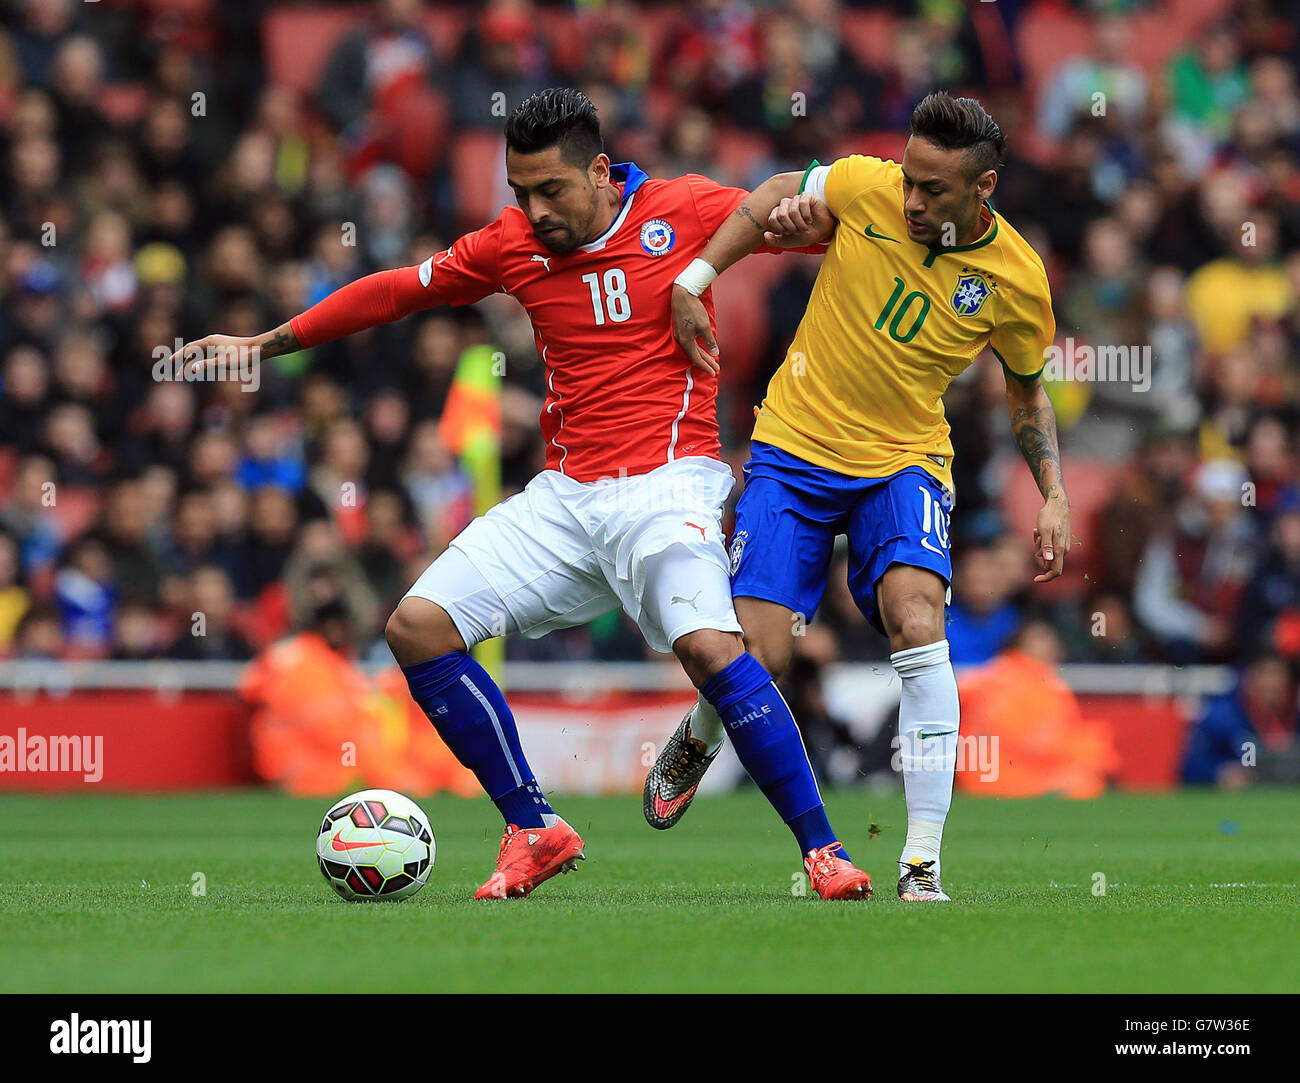 Soccer - International Friendly - Brazil v Chile - Emirates Stadium. Chile's Gonzalo Jara is challenged by Brazil's Neymar (right) during the International Friendly at the Emirates Stadium, London. Stock Photo